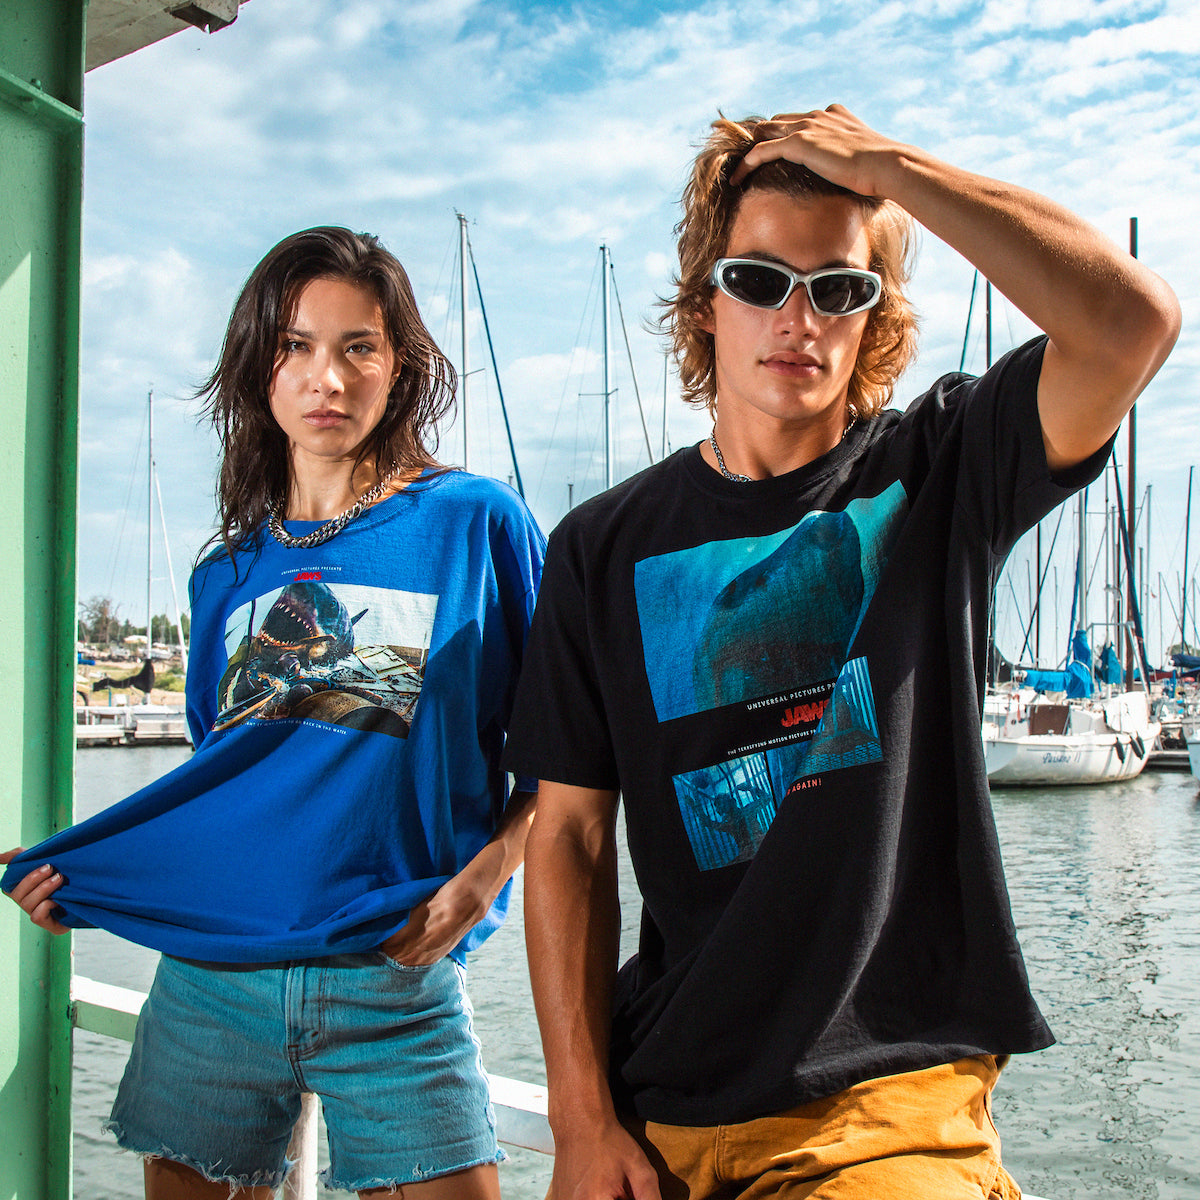 Boat Attack Blue Tee